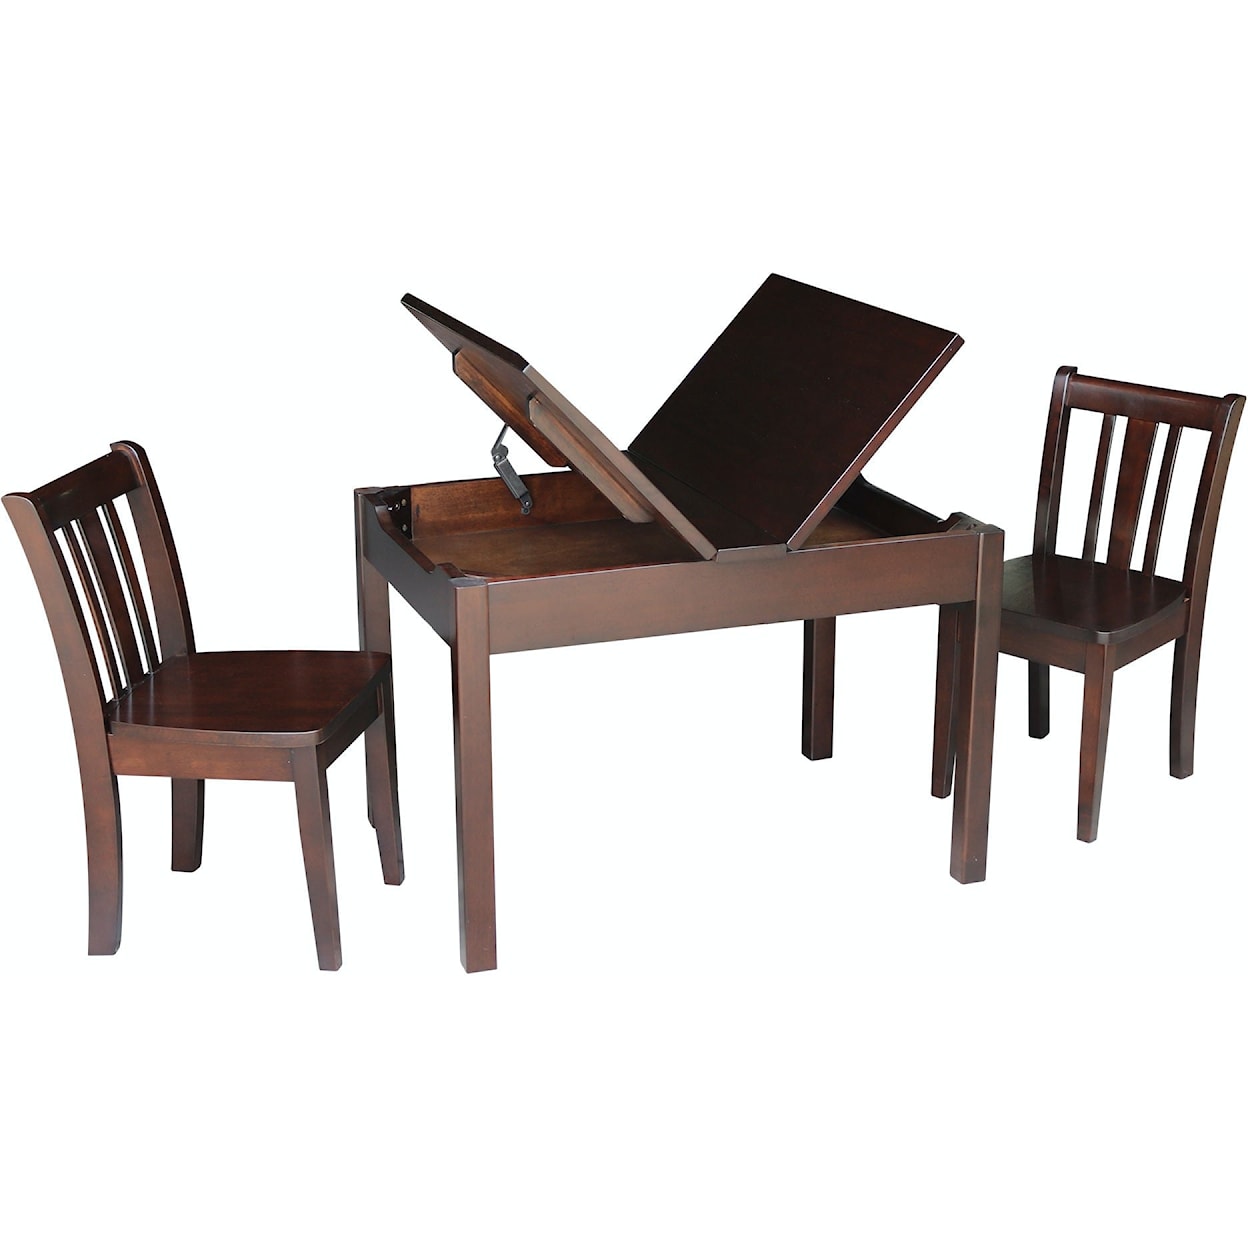 John Thomas Home Accents Storage Table and Chairs in Rich Mocha